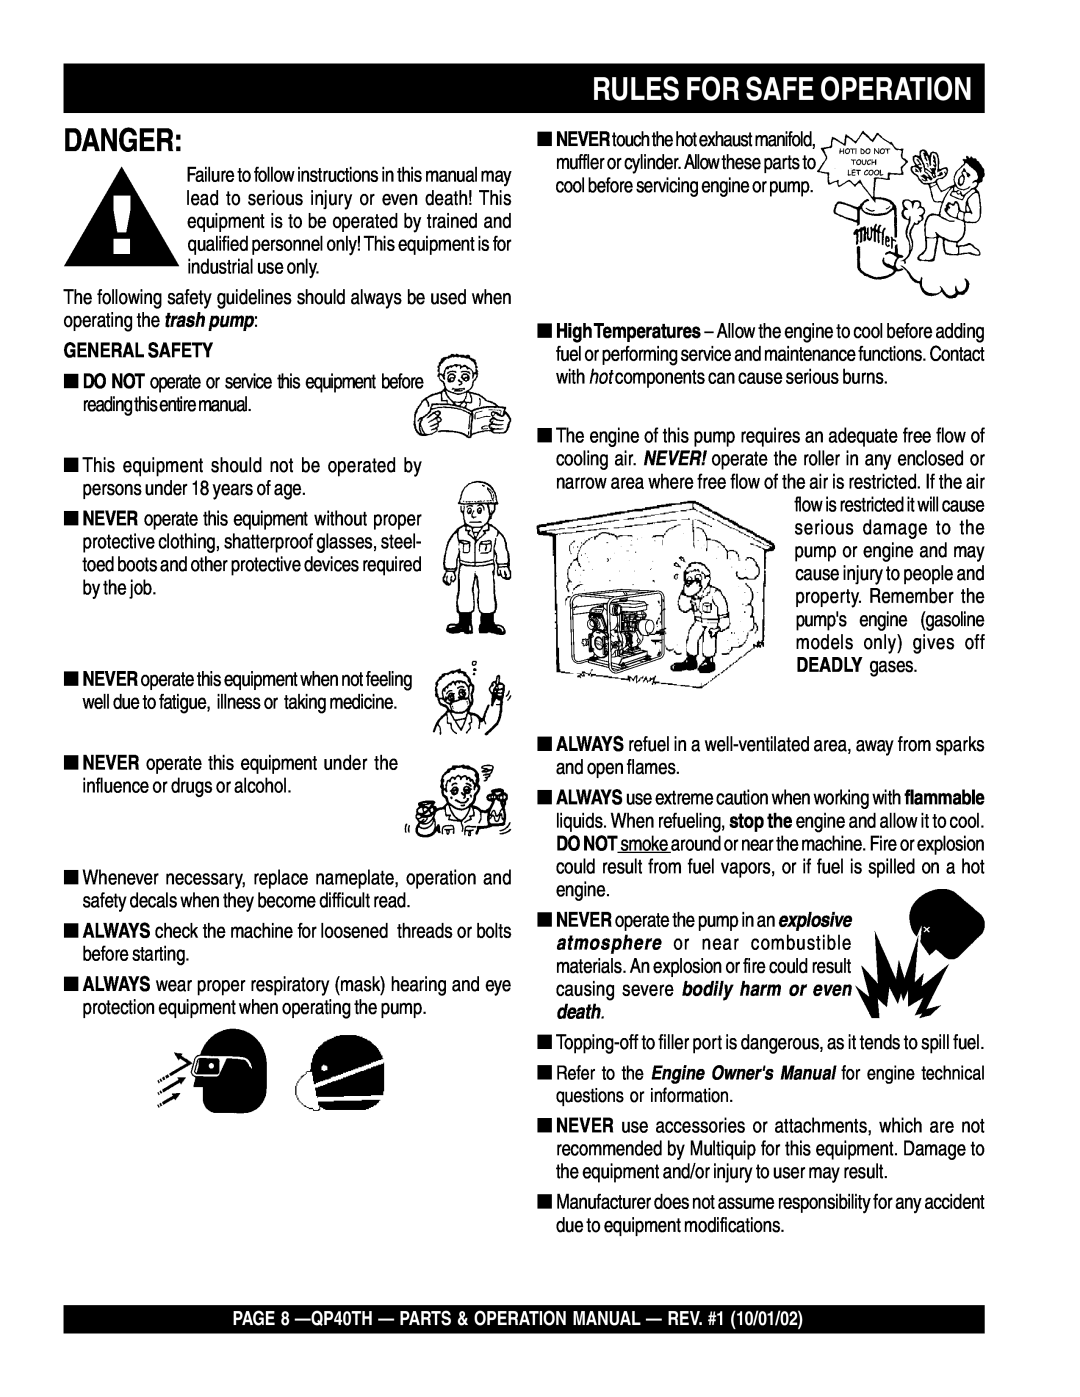 Multiquip QP40TH operation manual Danger, Rules For Safe Operation, General Safety 